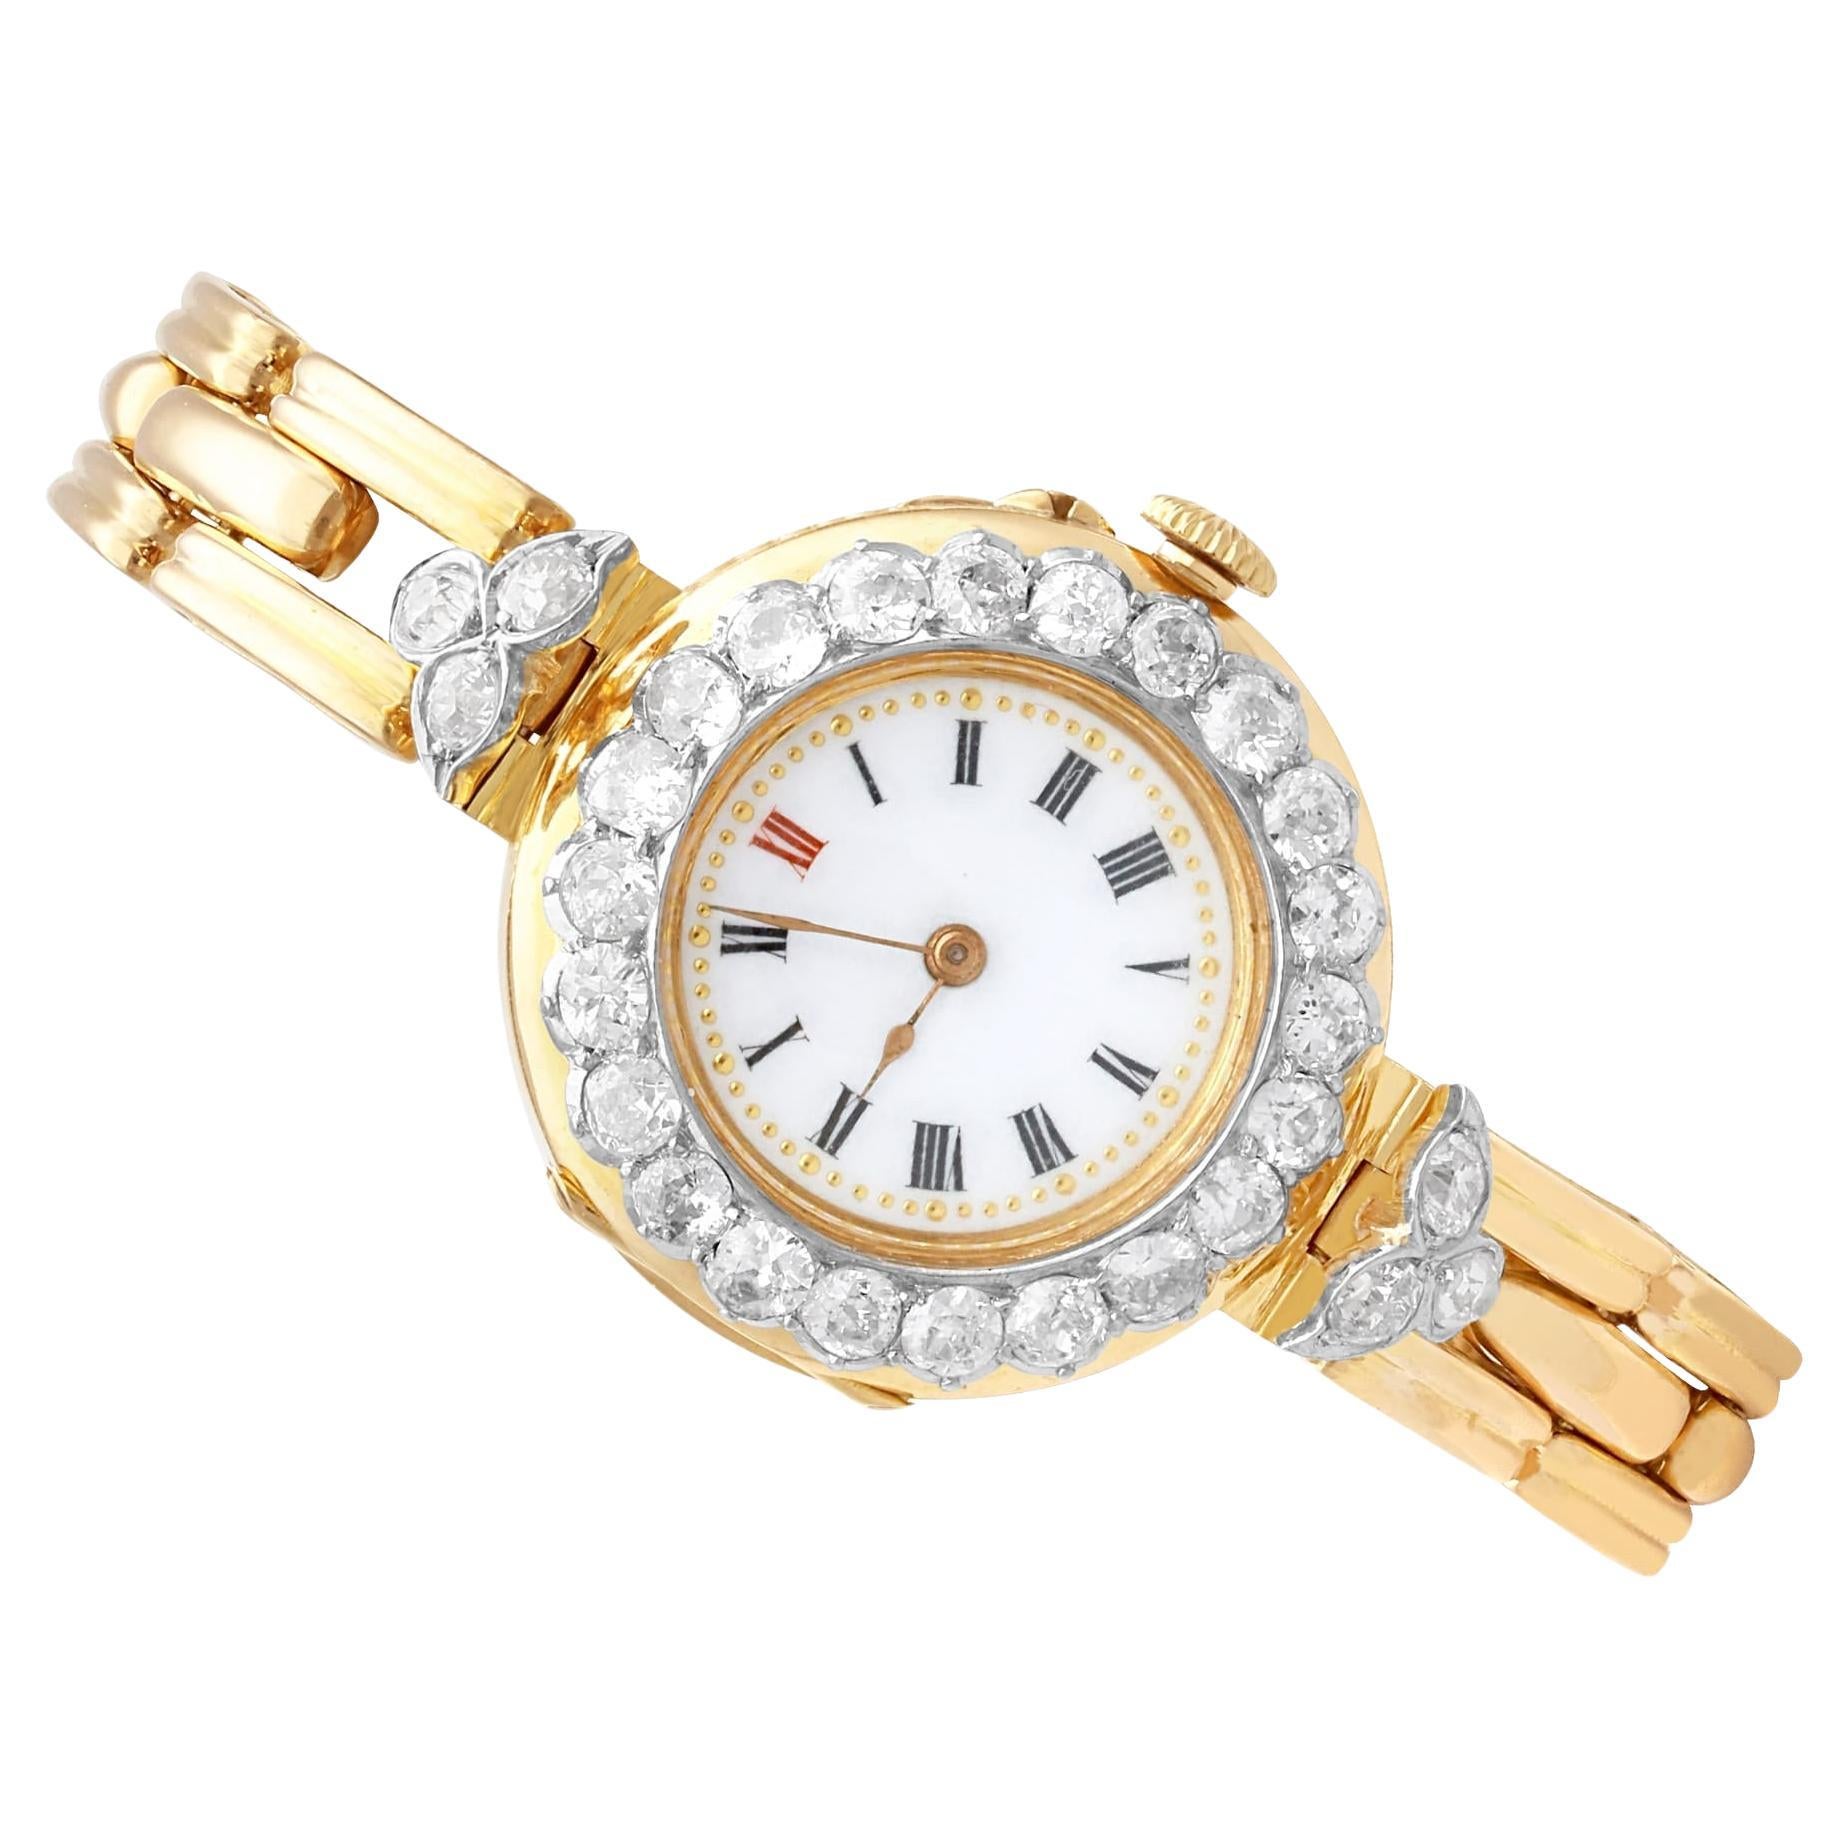 Antique Edwardian 2.75Ct Diamond and 18k Yellow Gold Cocktail Watch 1909 For Sale